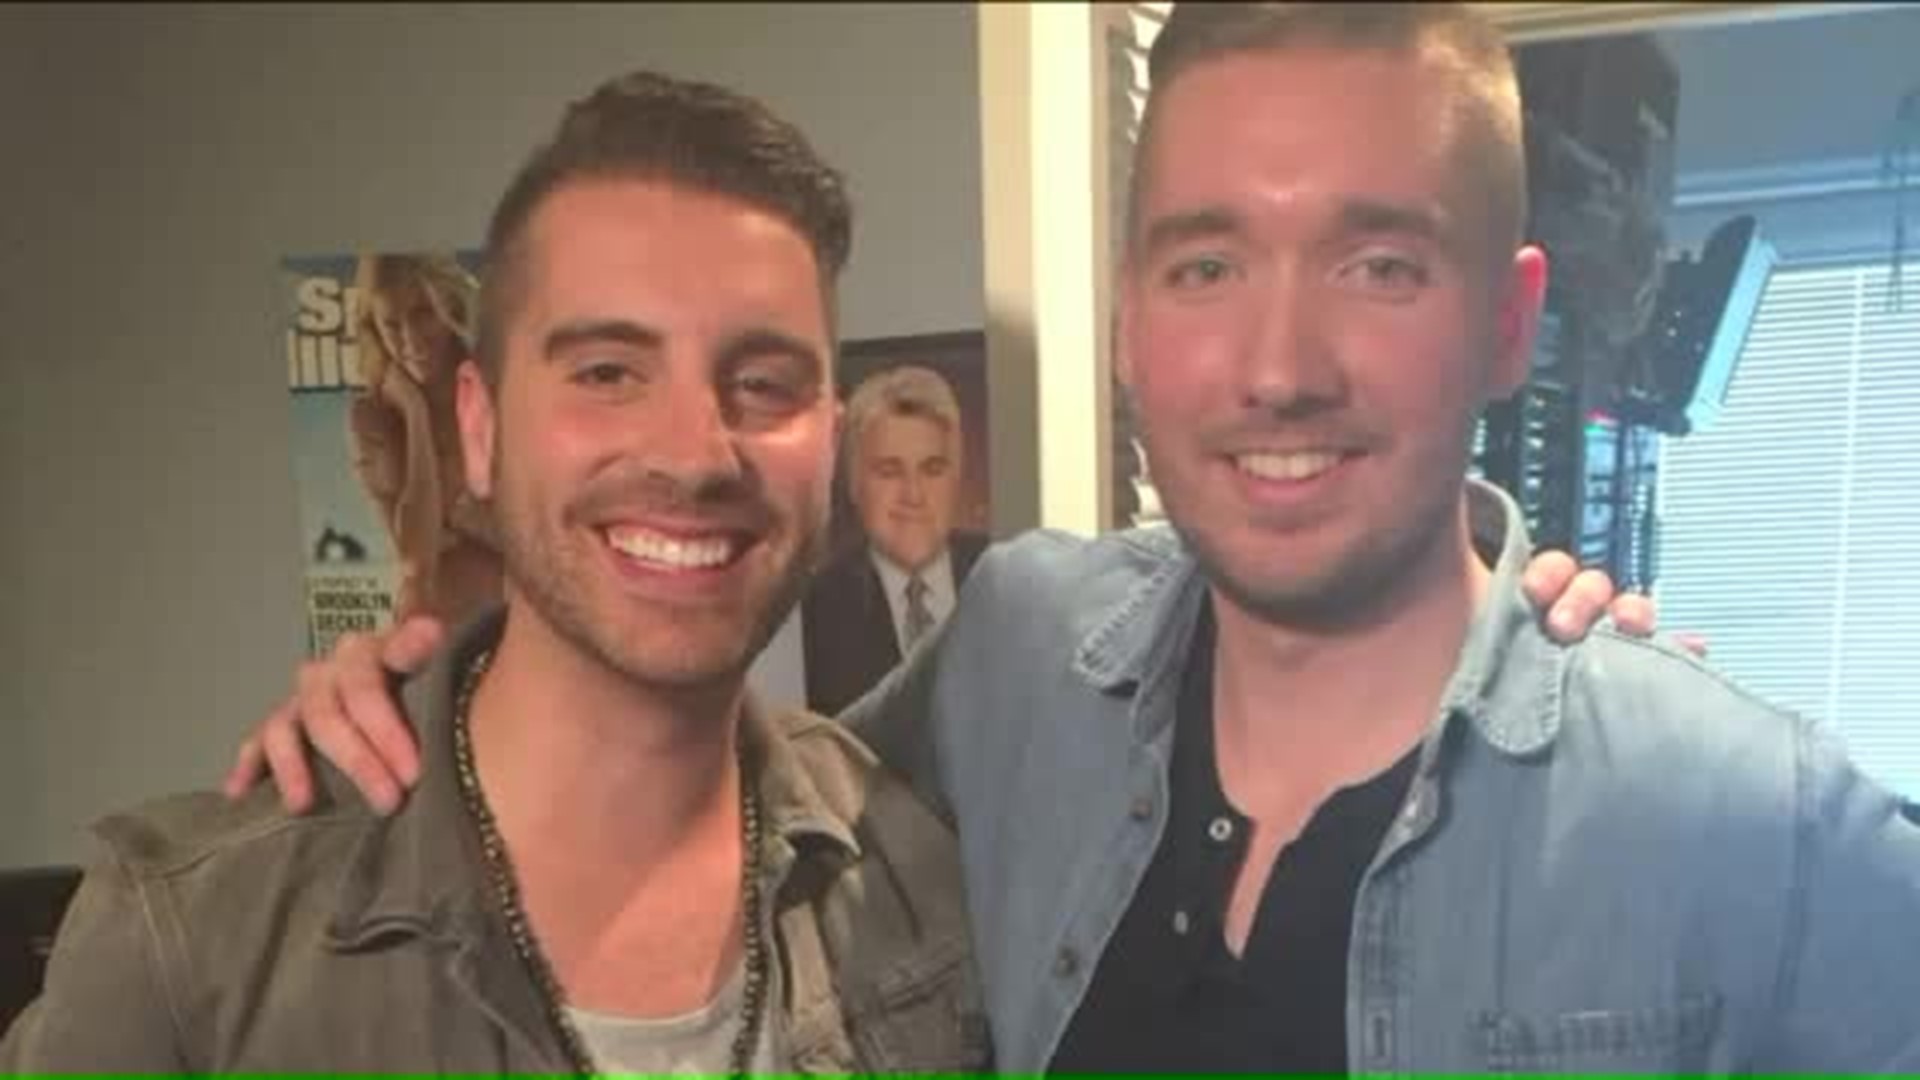 Connecticut has another `American Idol` hopeful vying for the crown